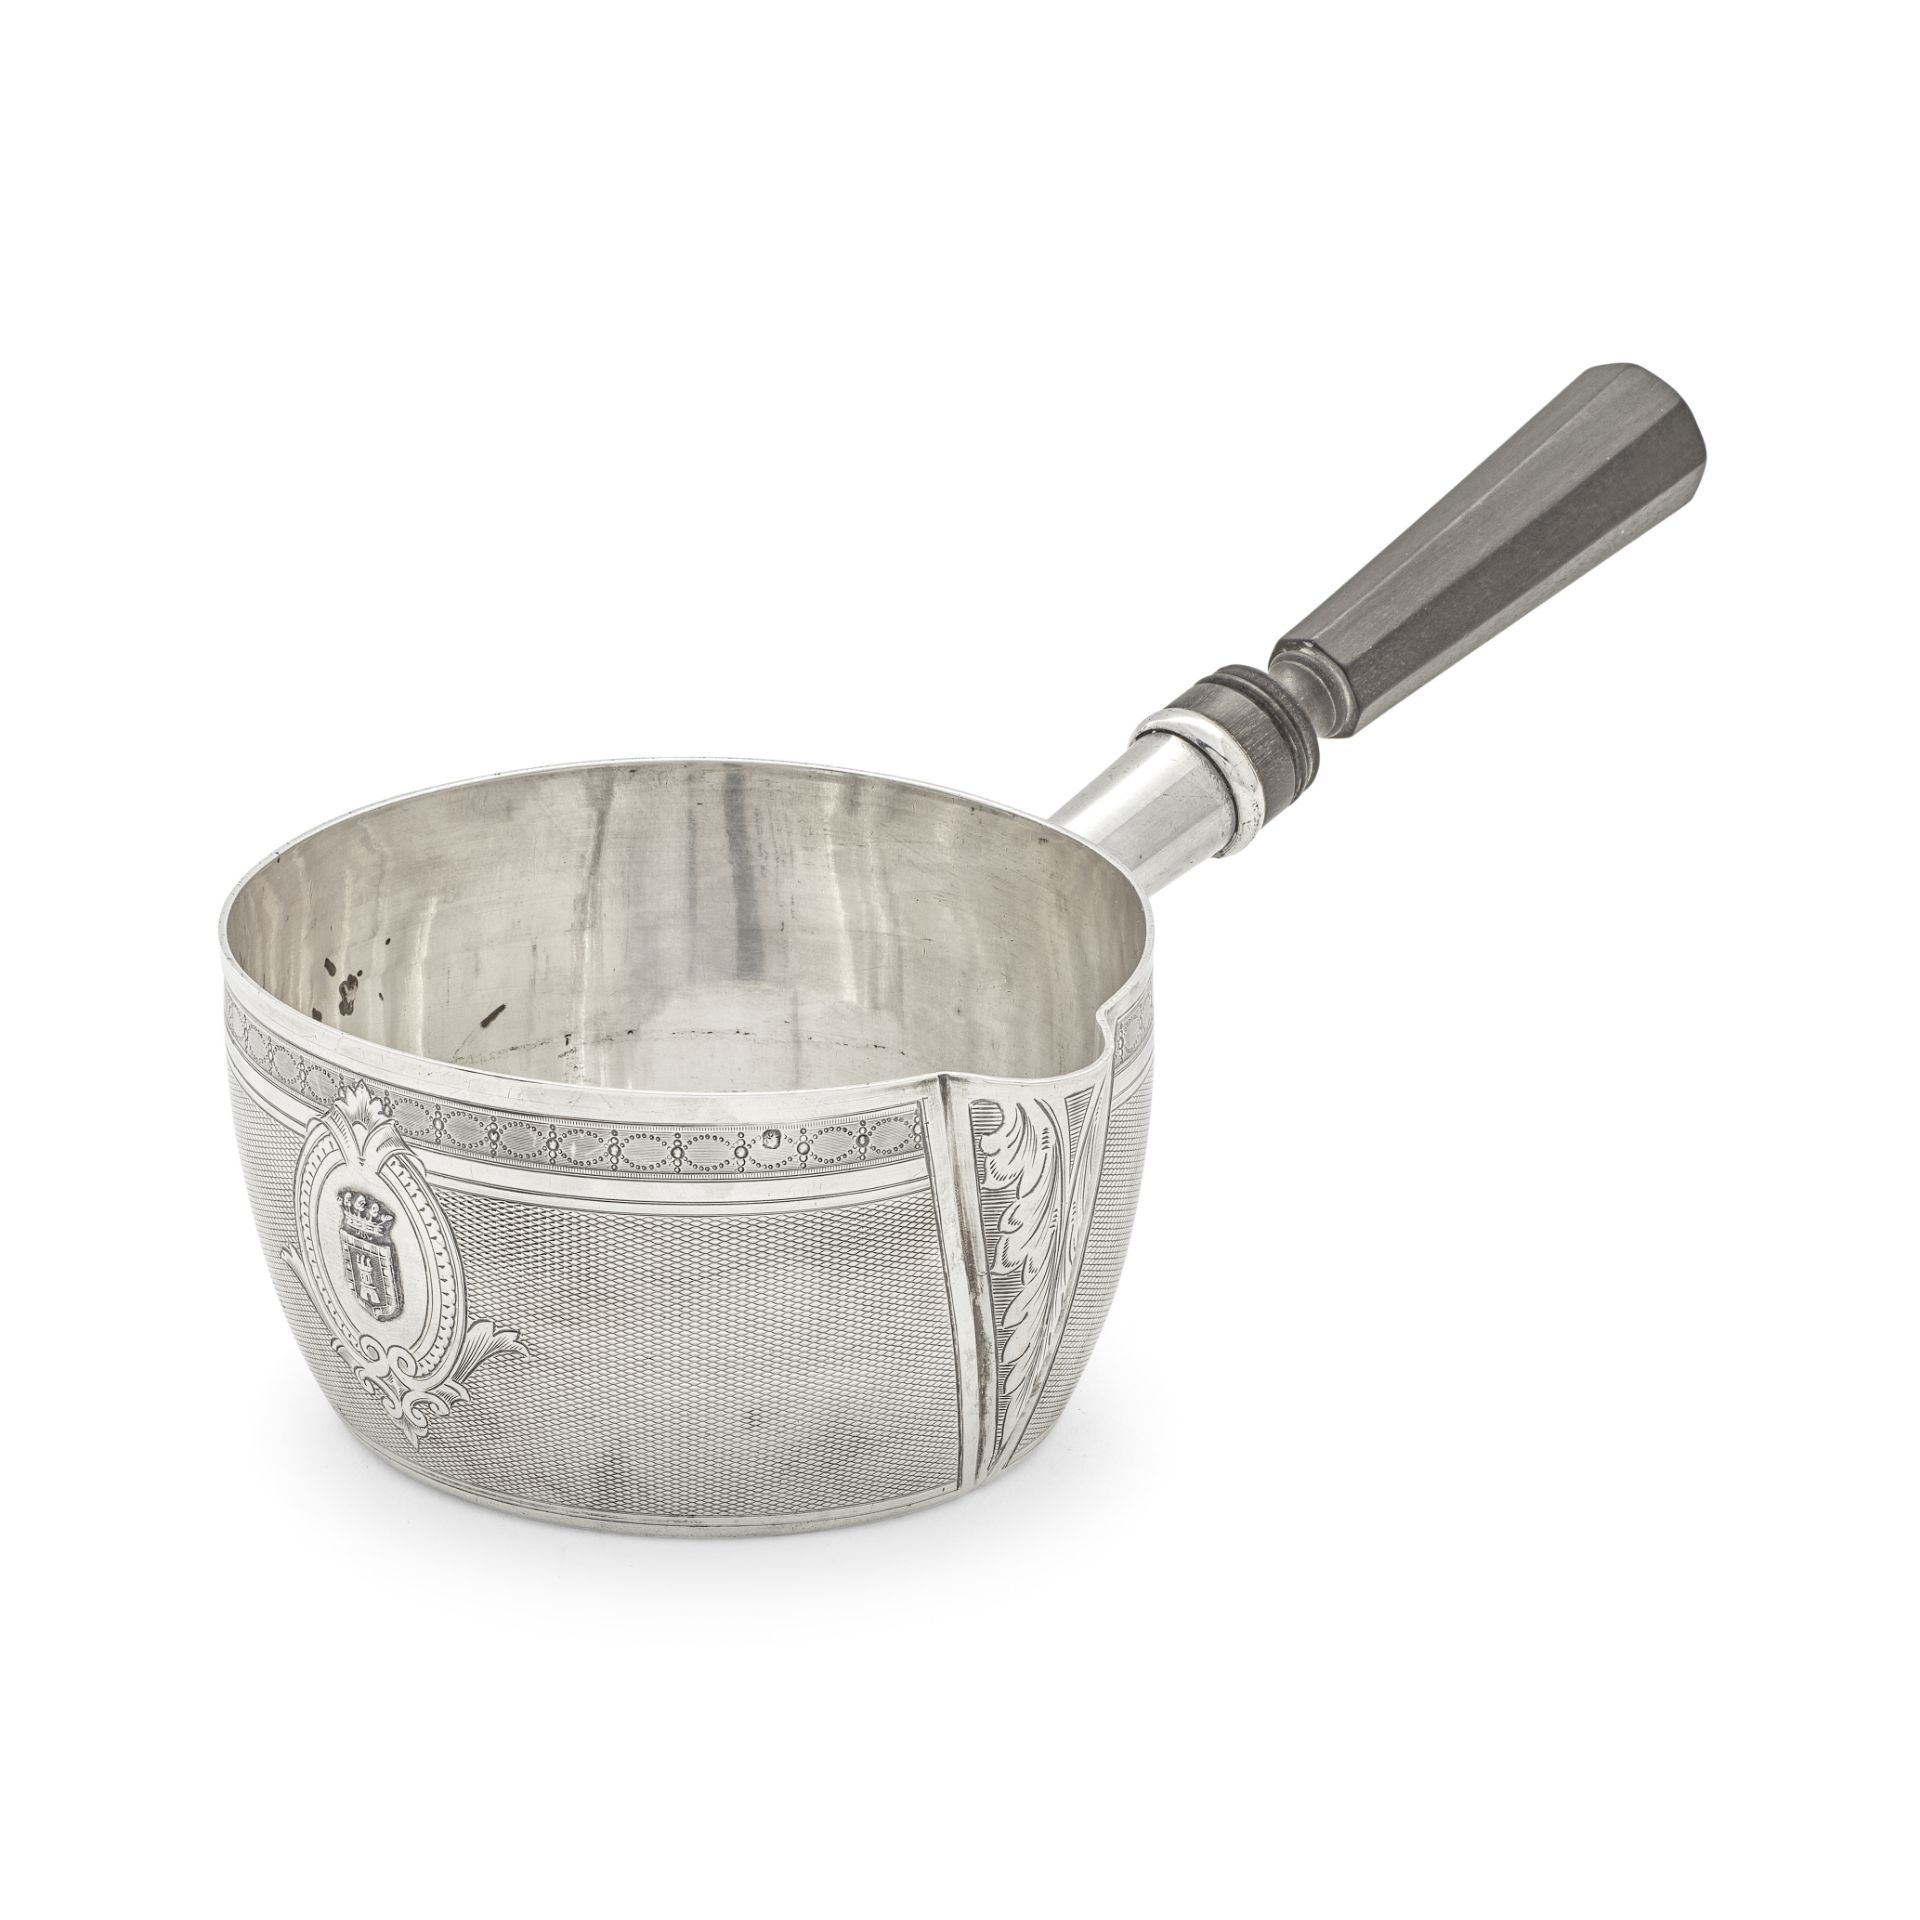 A French silver pan with first standard Minerva head mark, lozenge maker's mark, late 19th century